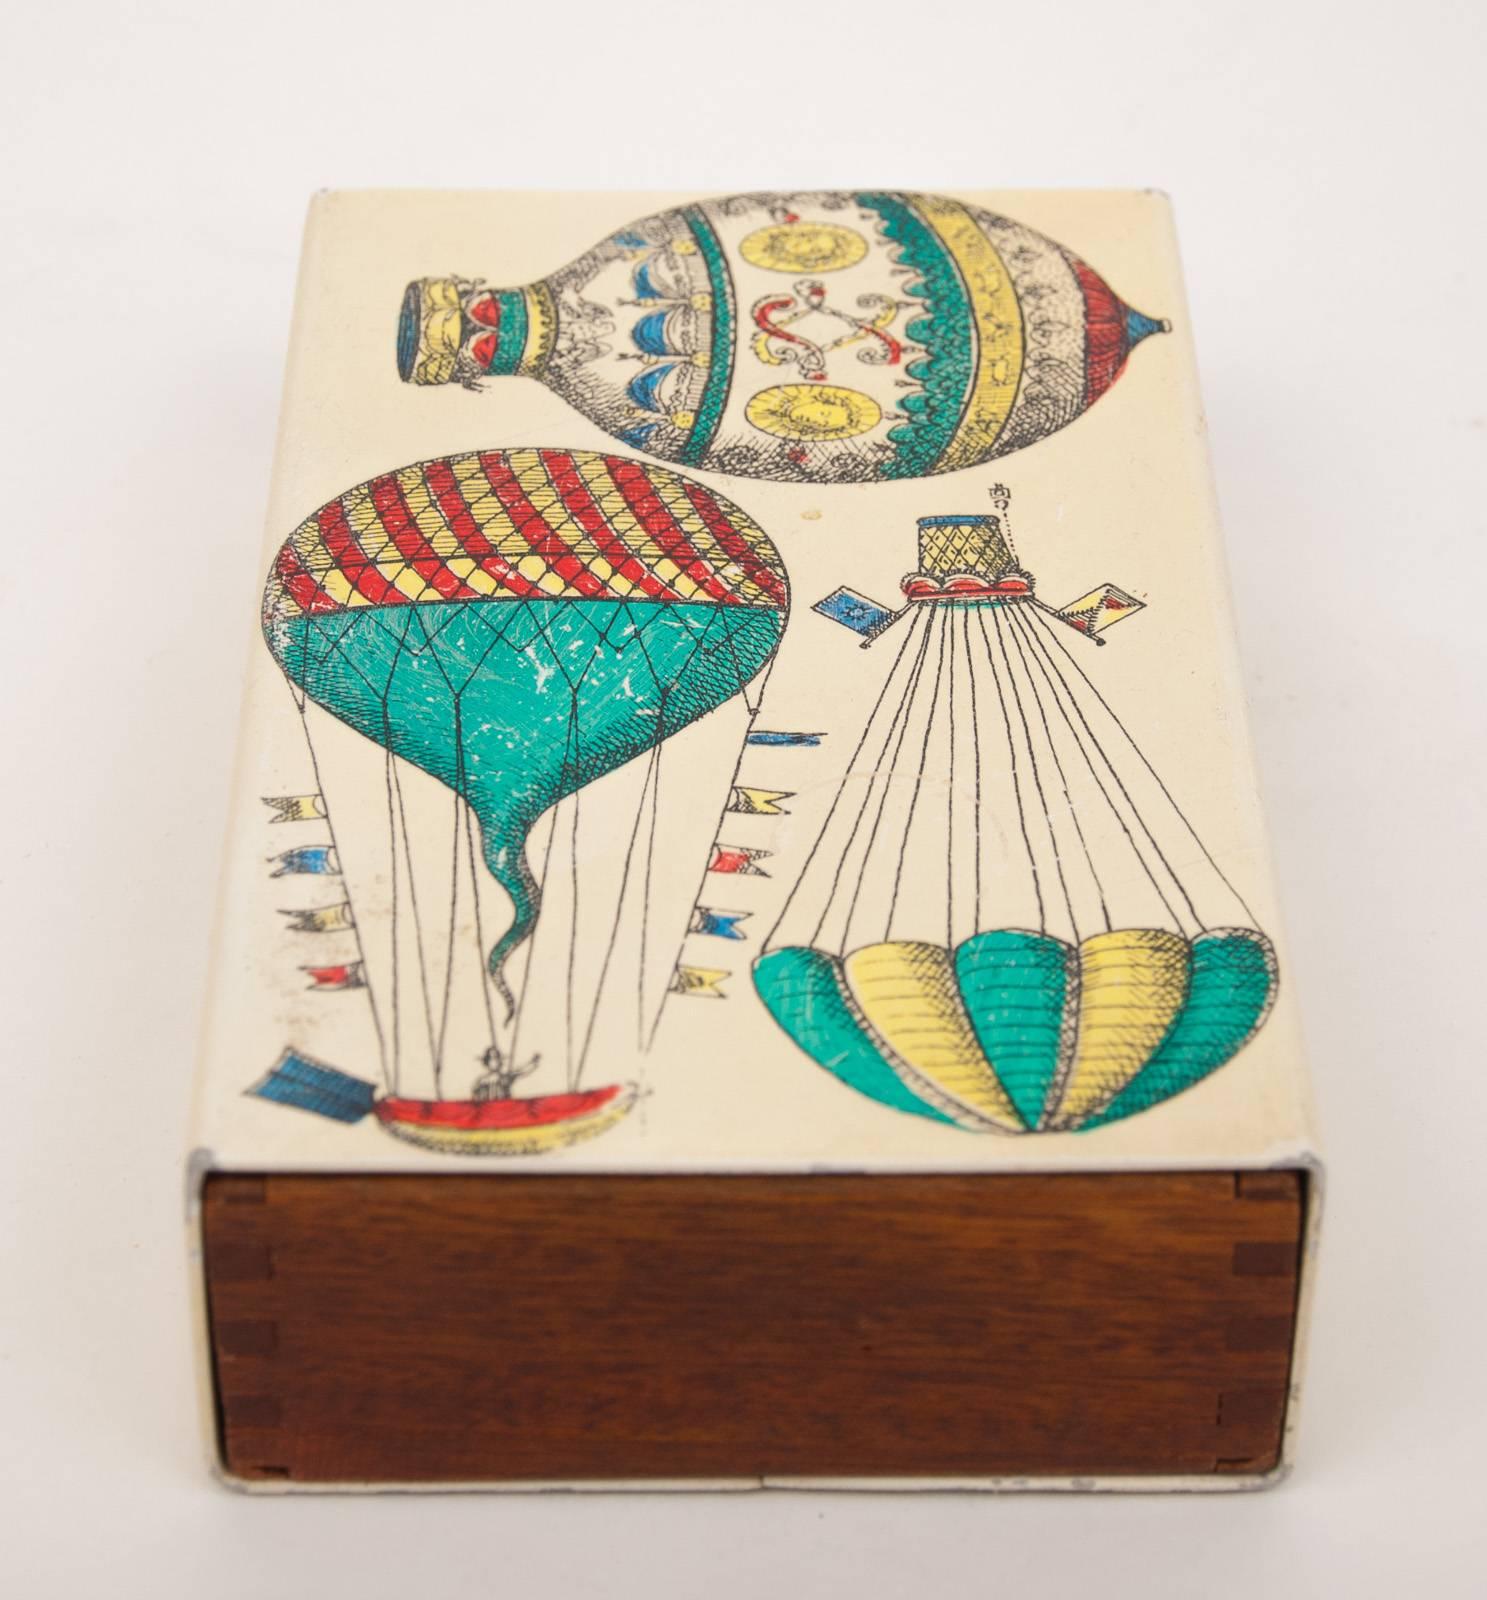 A Piero Fornasetti box decorated with hot air balloons.
Metal, lithographically printed and hand colored.
Mahogany interior,
Italy, circa 1960.